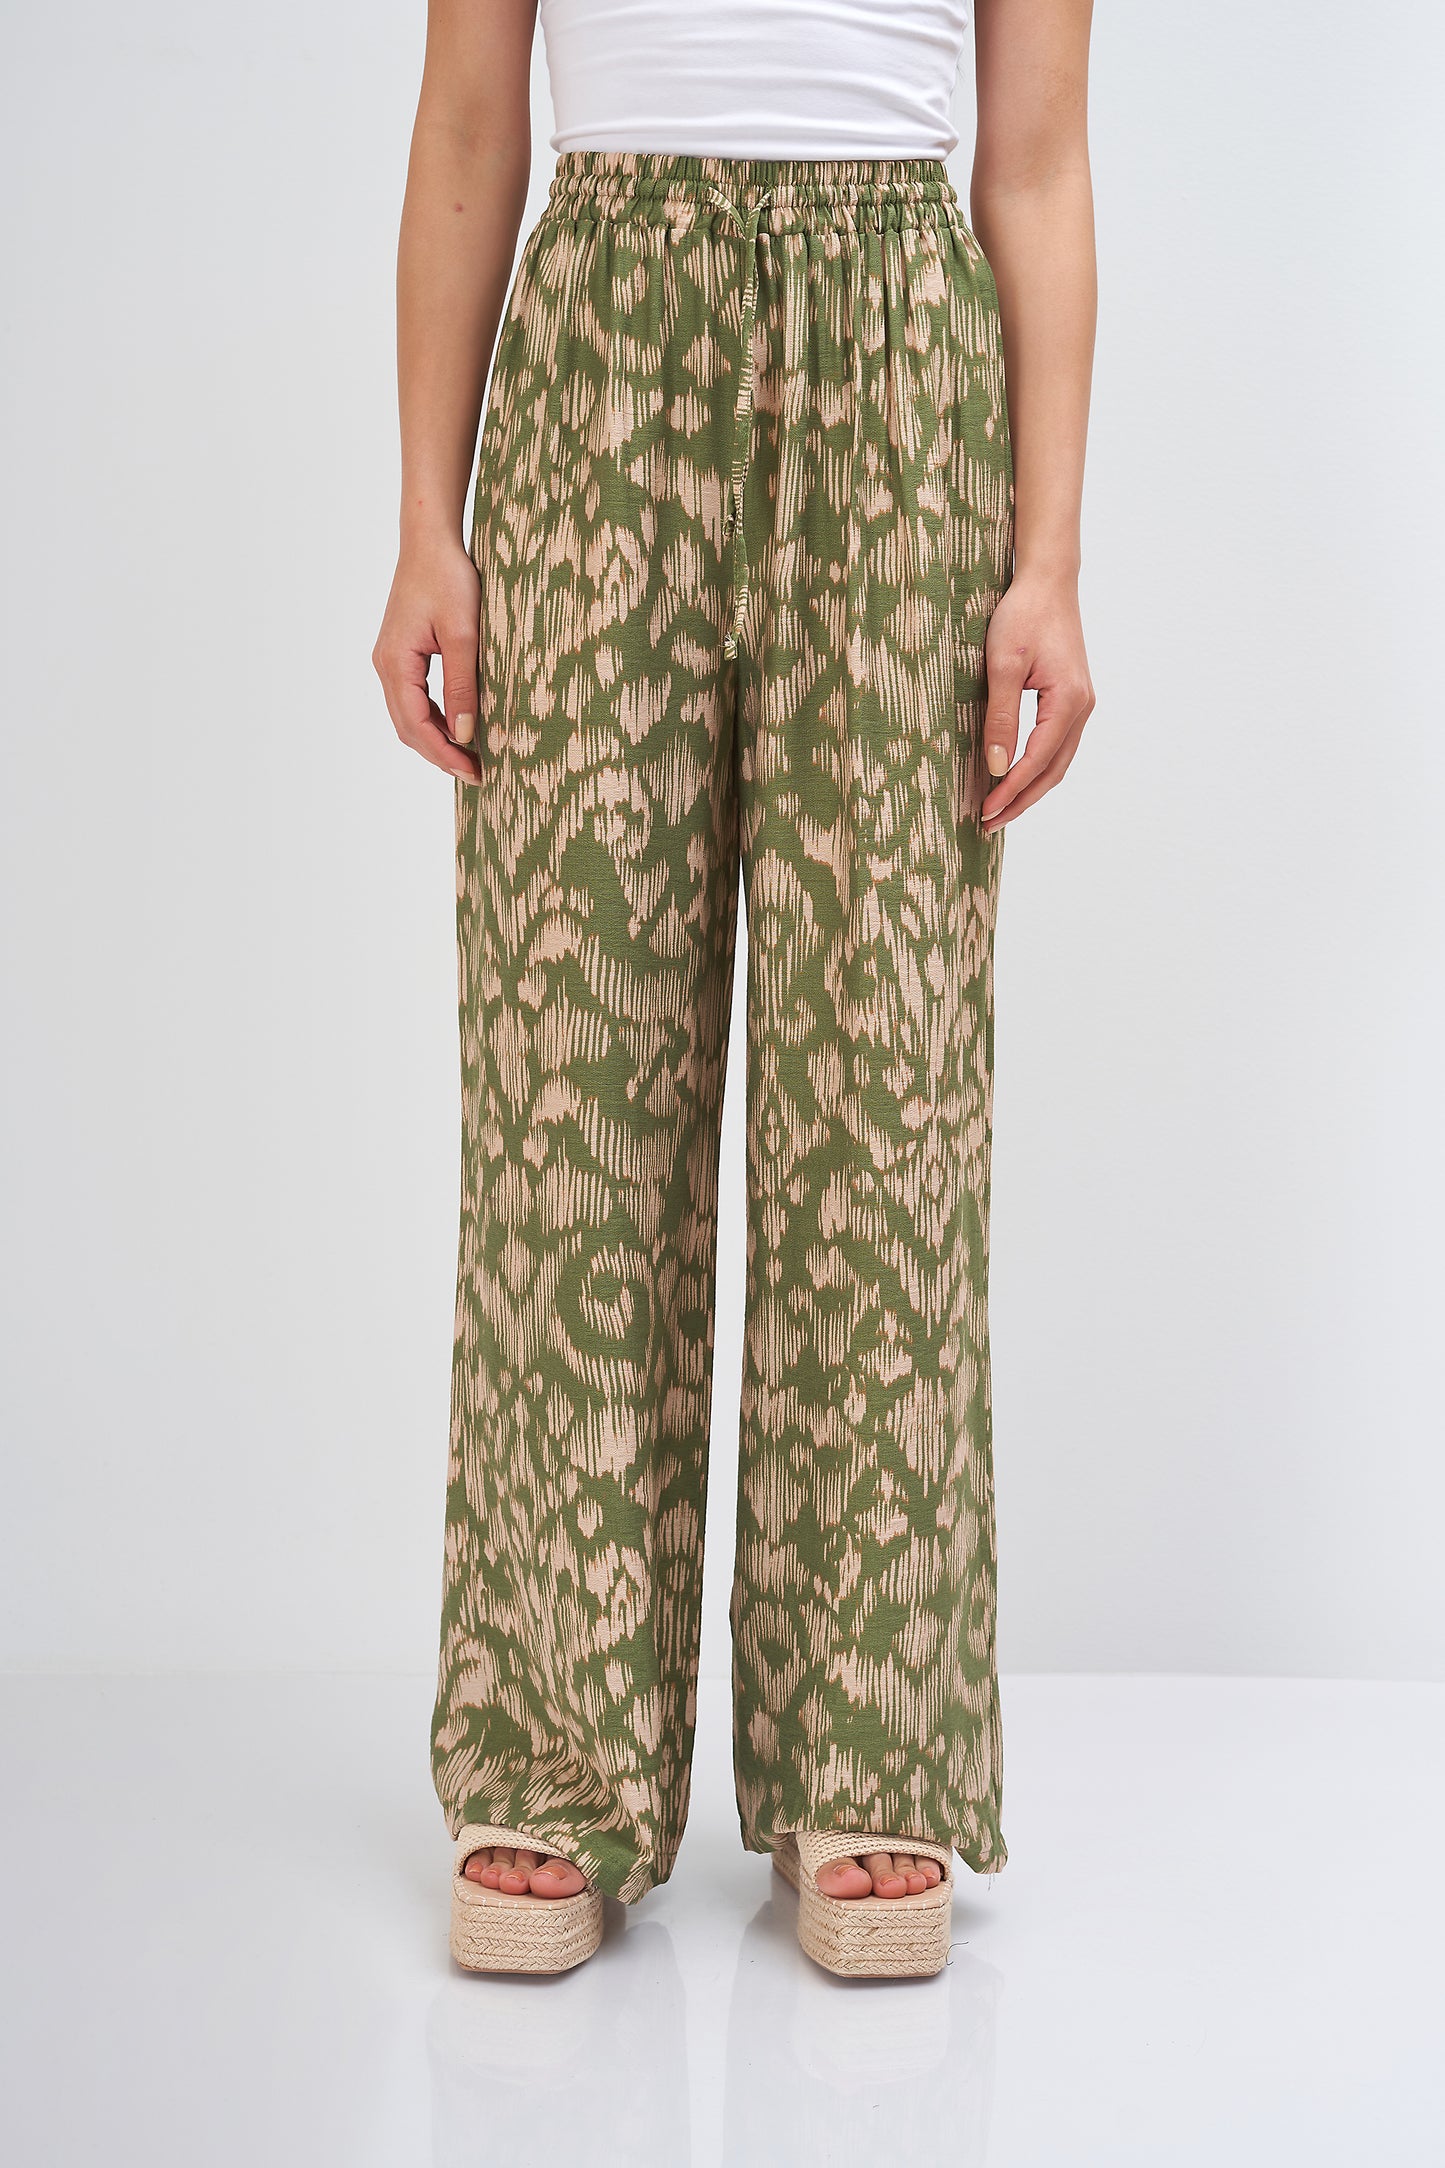 Printed Trouser - (with-patterned) designs